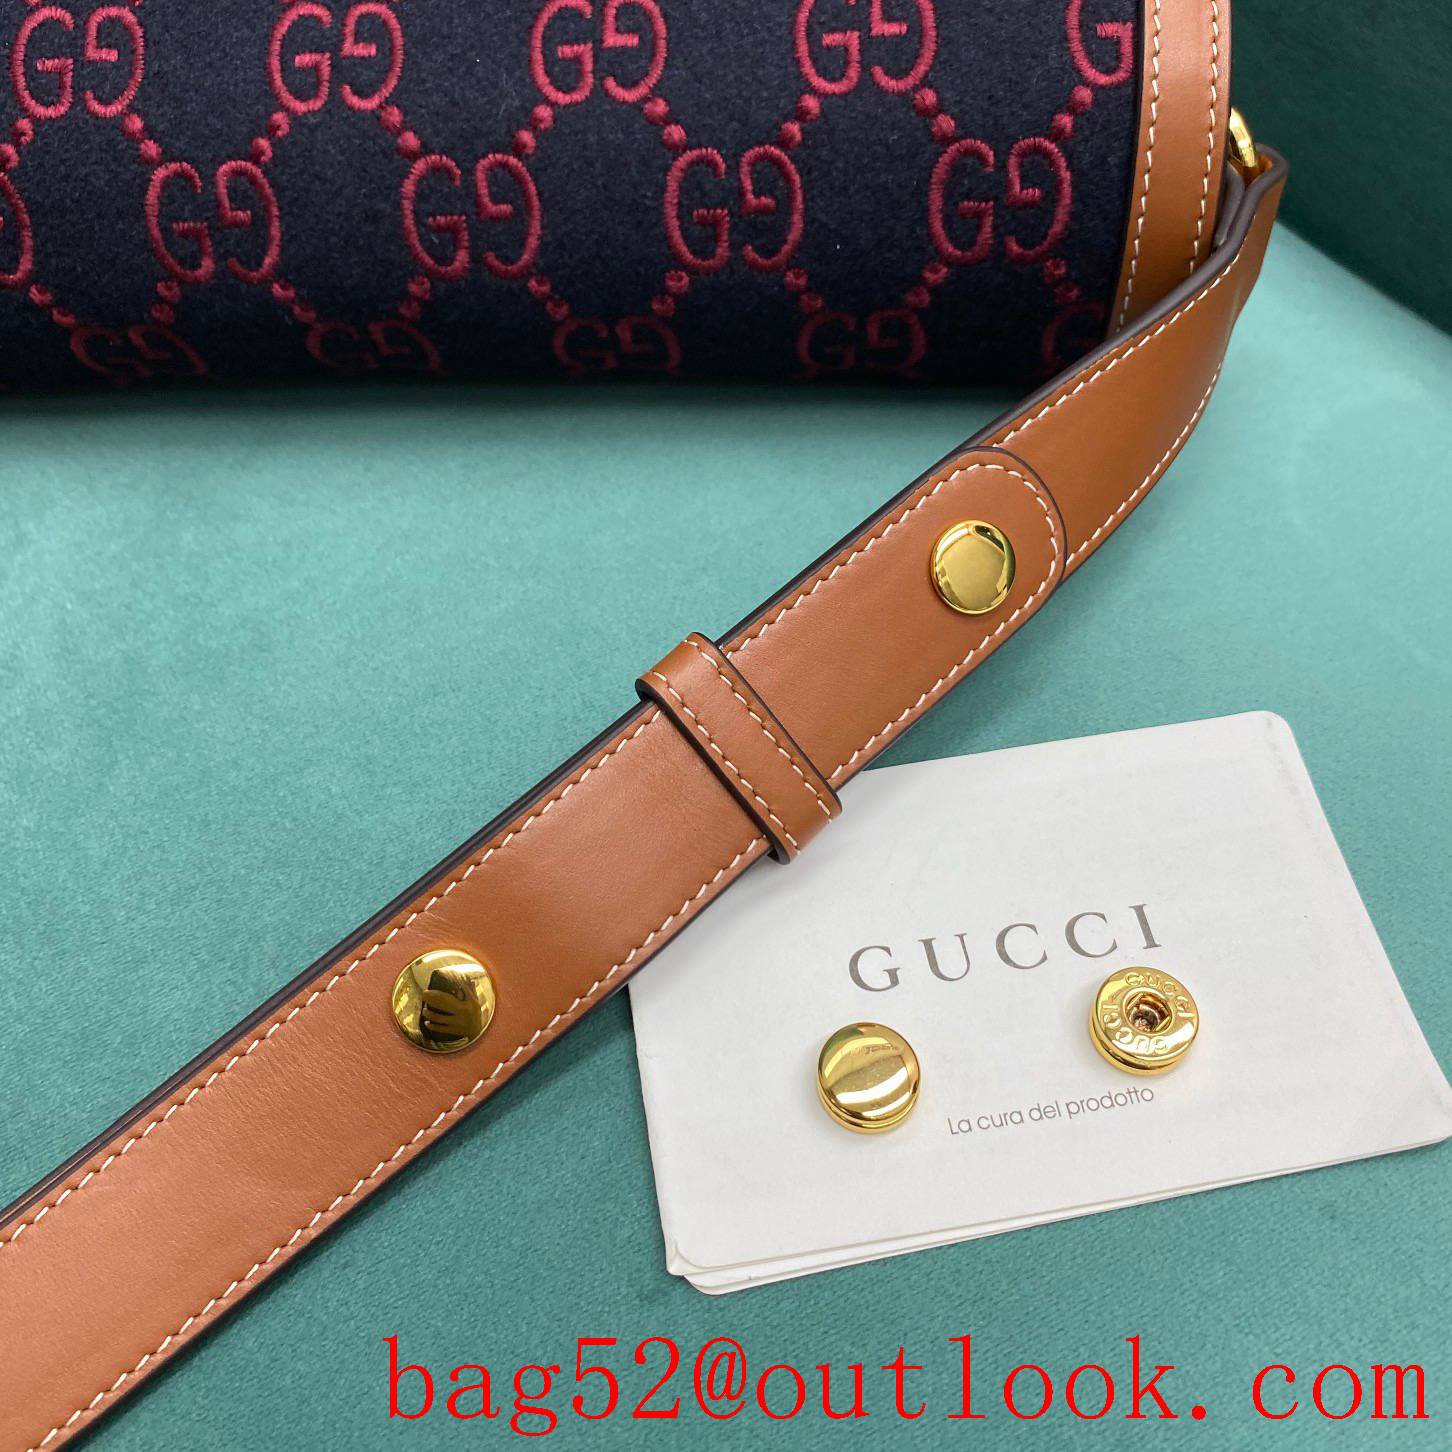 Gucci Burgundy lettering yellow leather trim with signature gg suede women's handbag